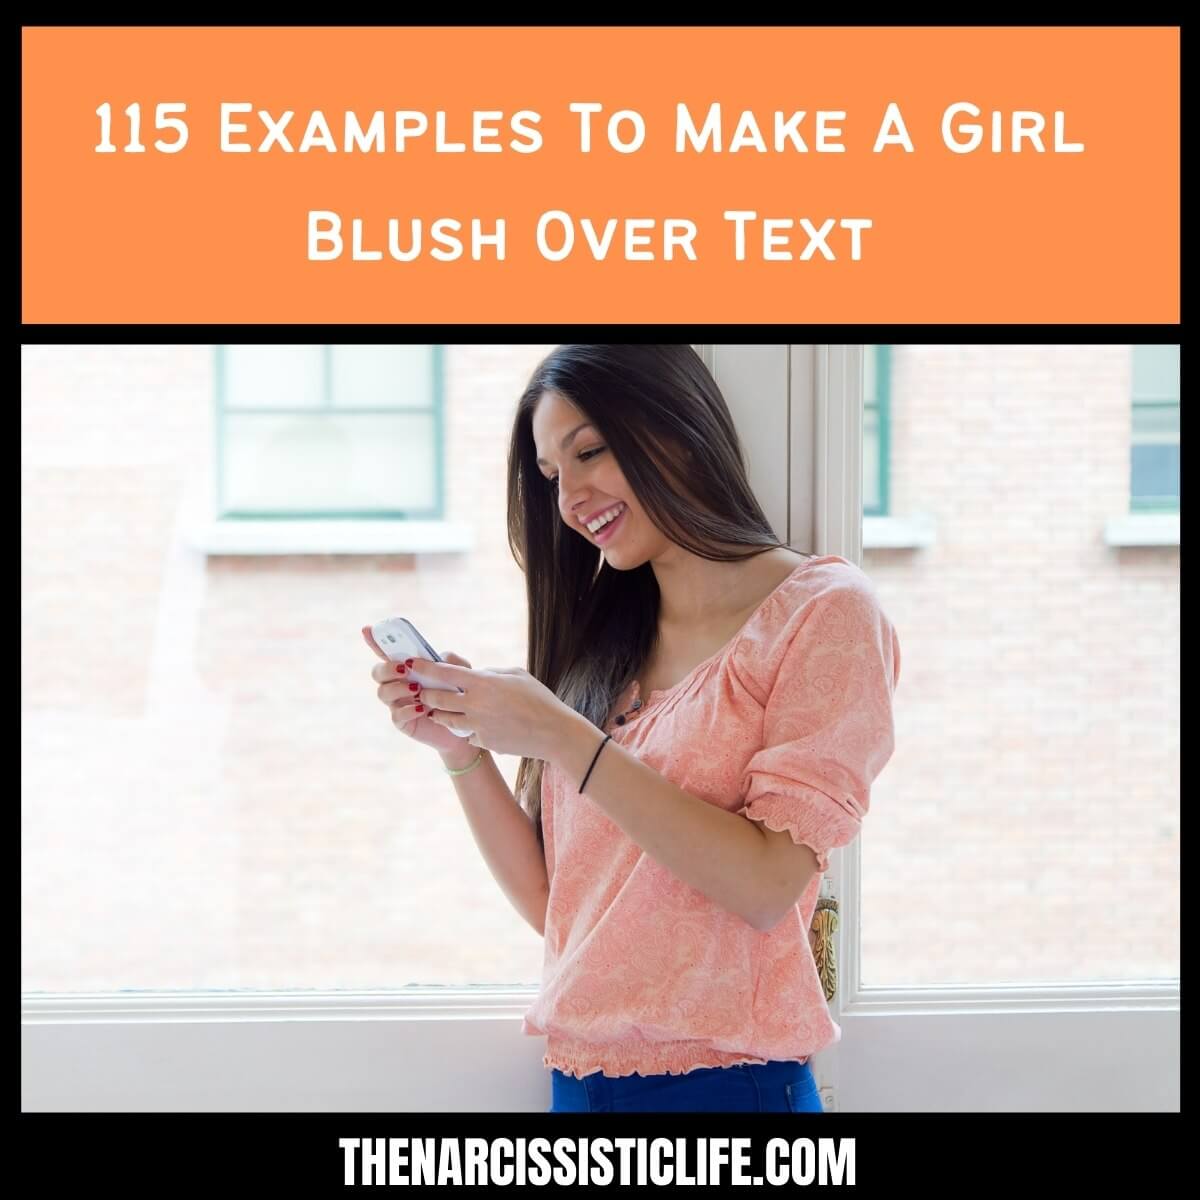 115 Examples To Make A Girl Blush Over Text